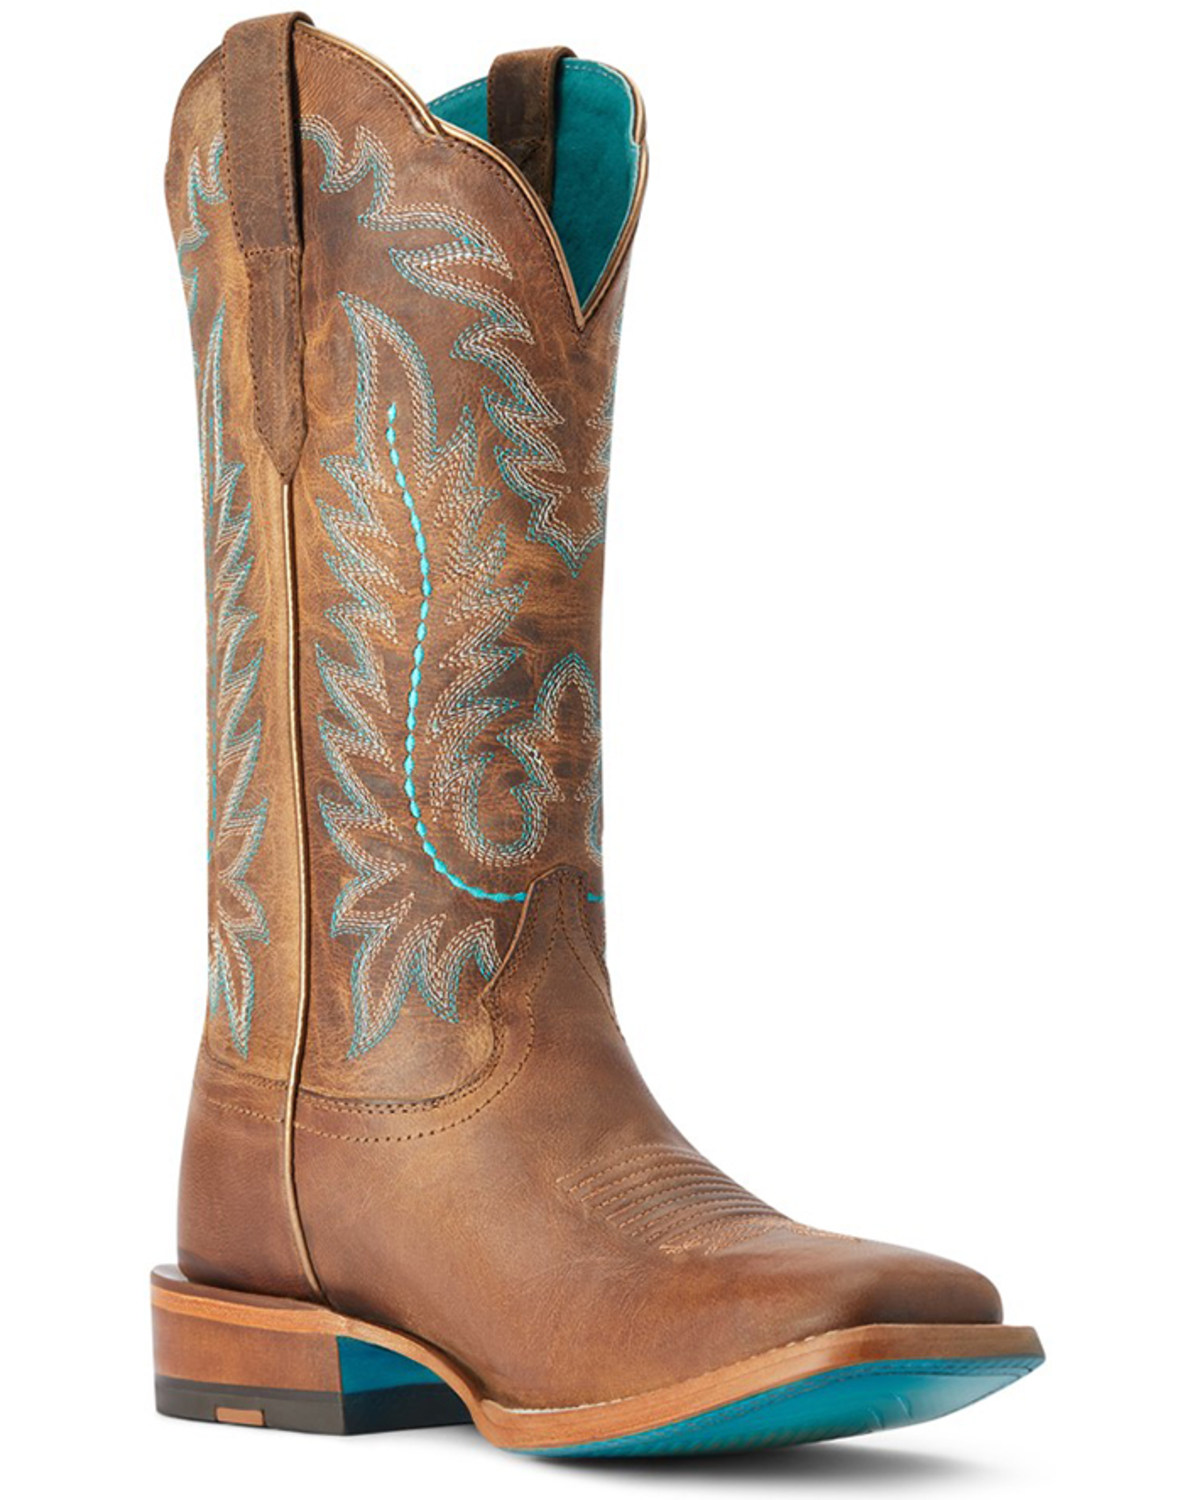 Ariat Women's Frontier Tilly TEK Step Western Boots - Broad Square Toe